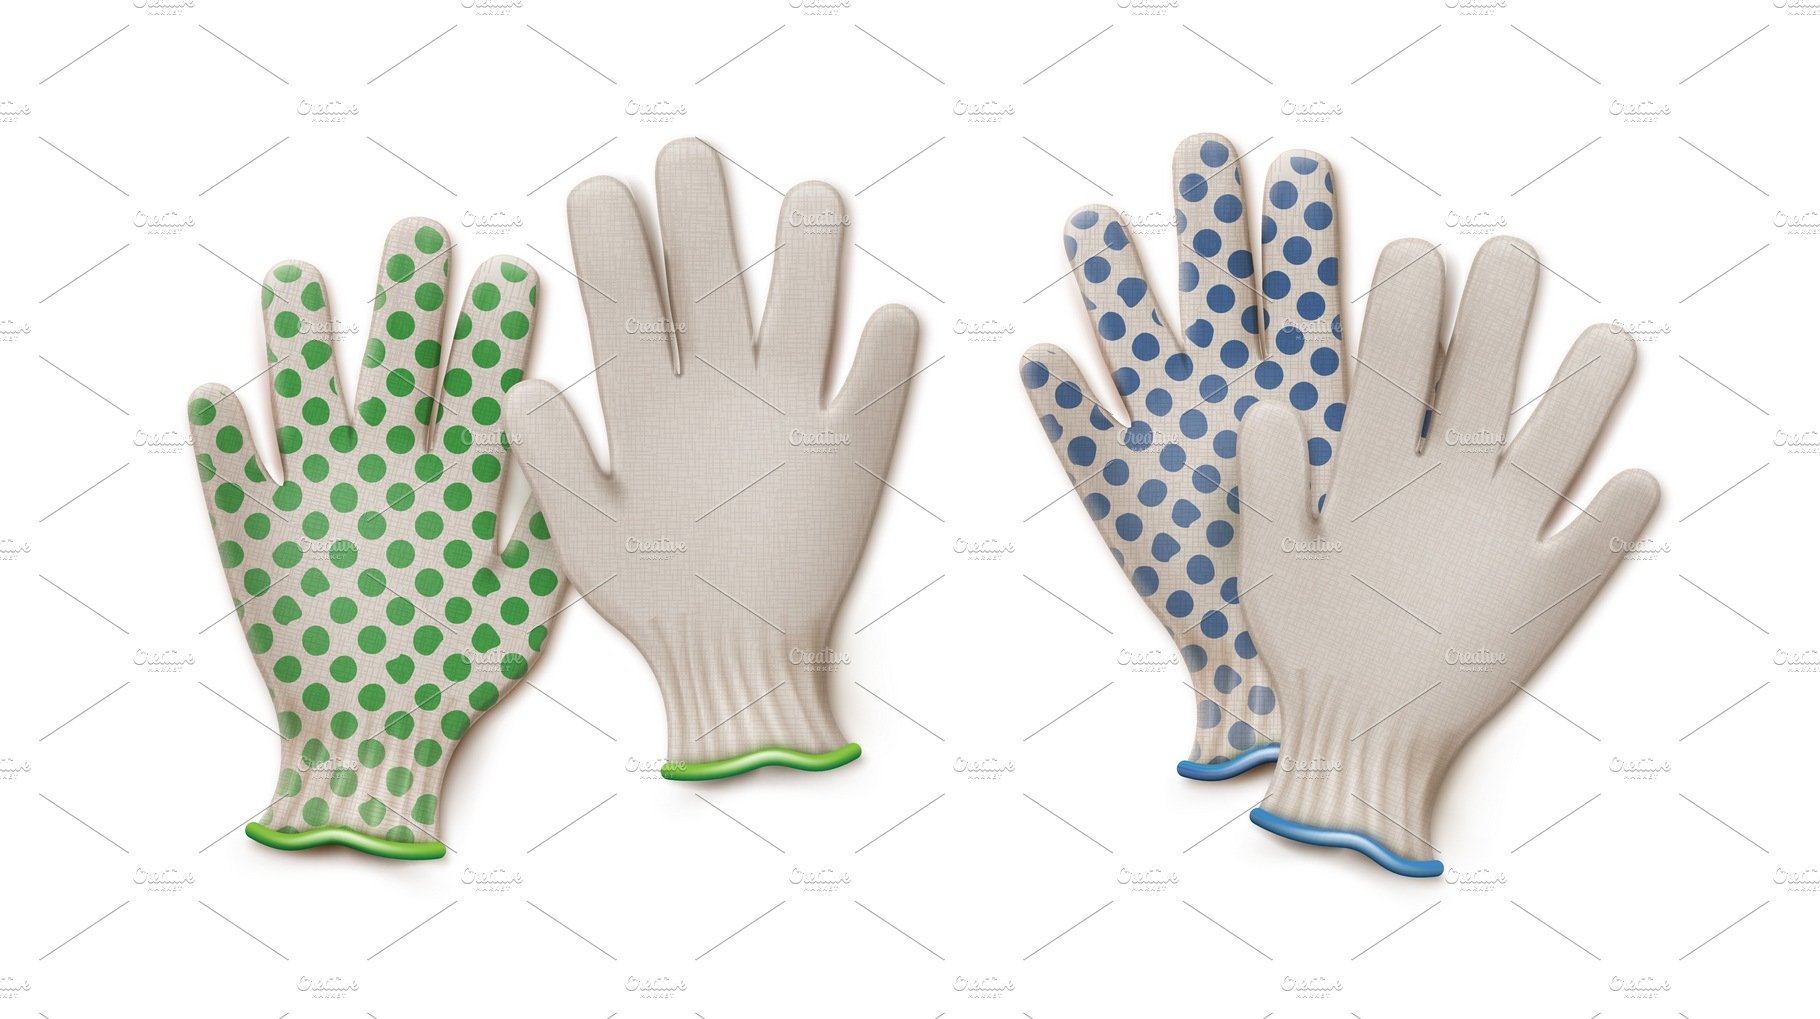 Pairs of gardening work gloves cover image.